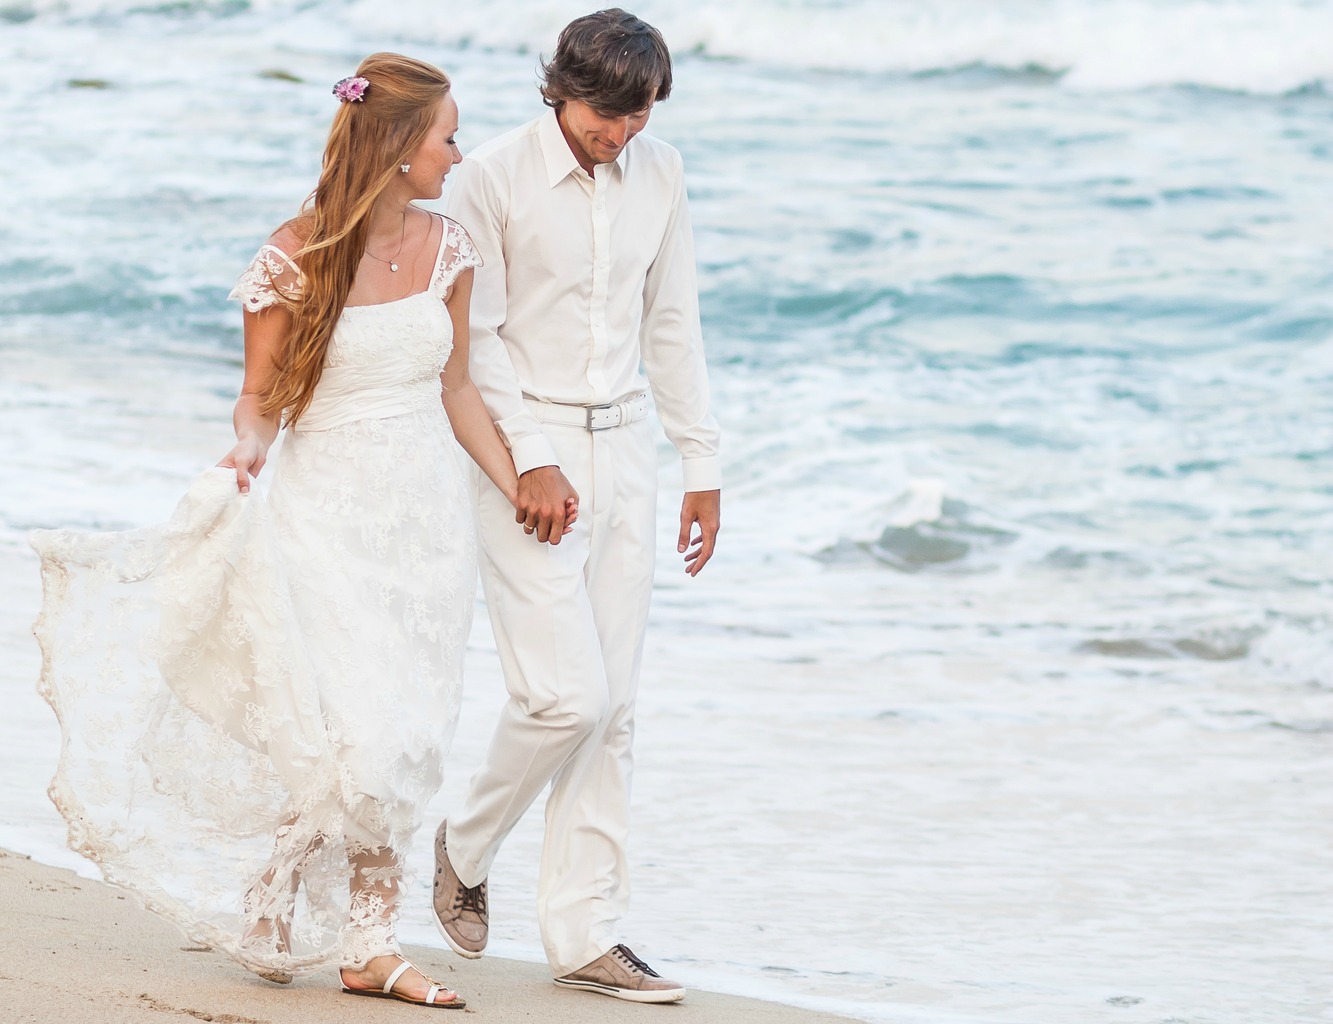 10 Things You Will Want to Know Before You Get Married